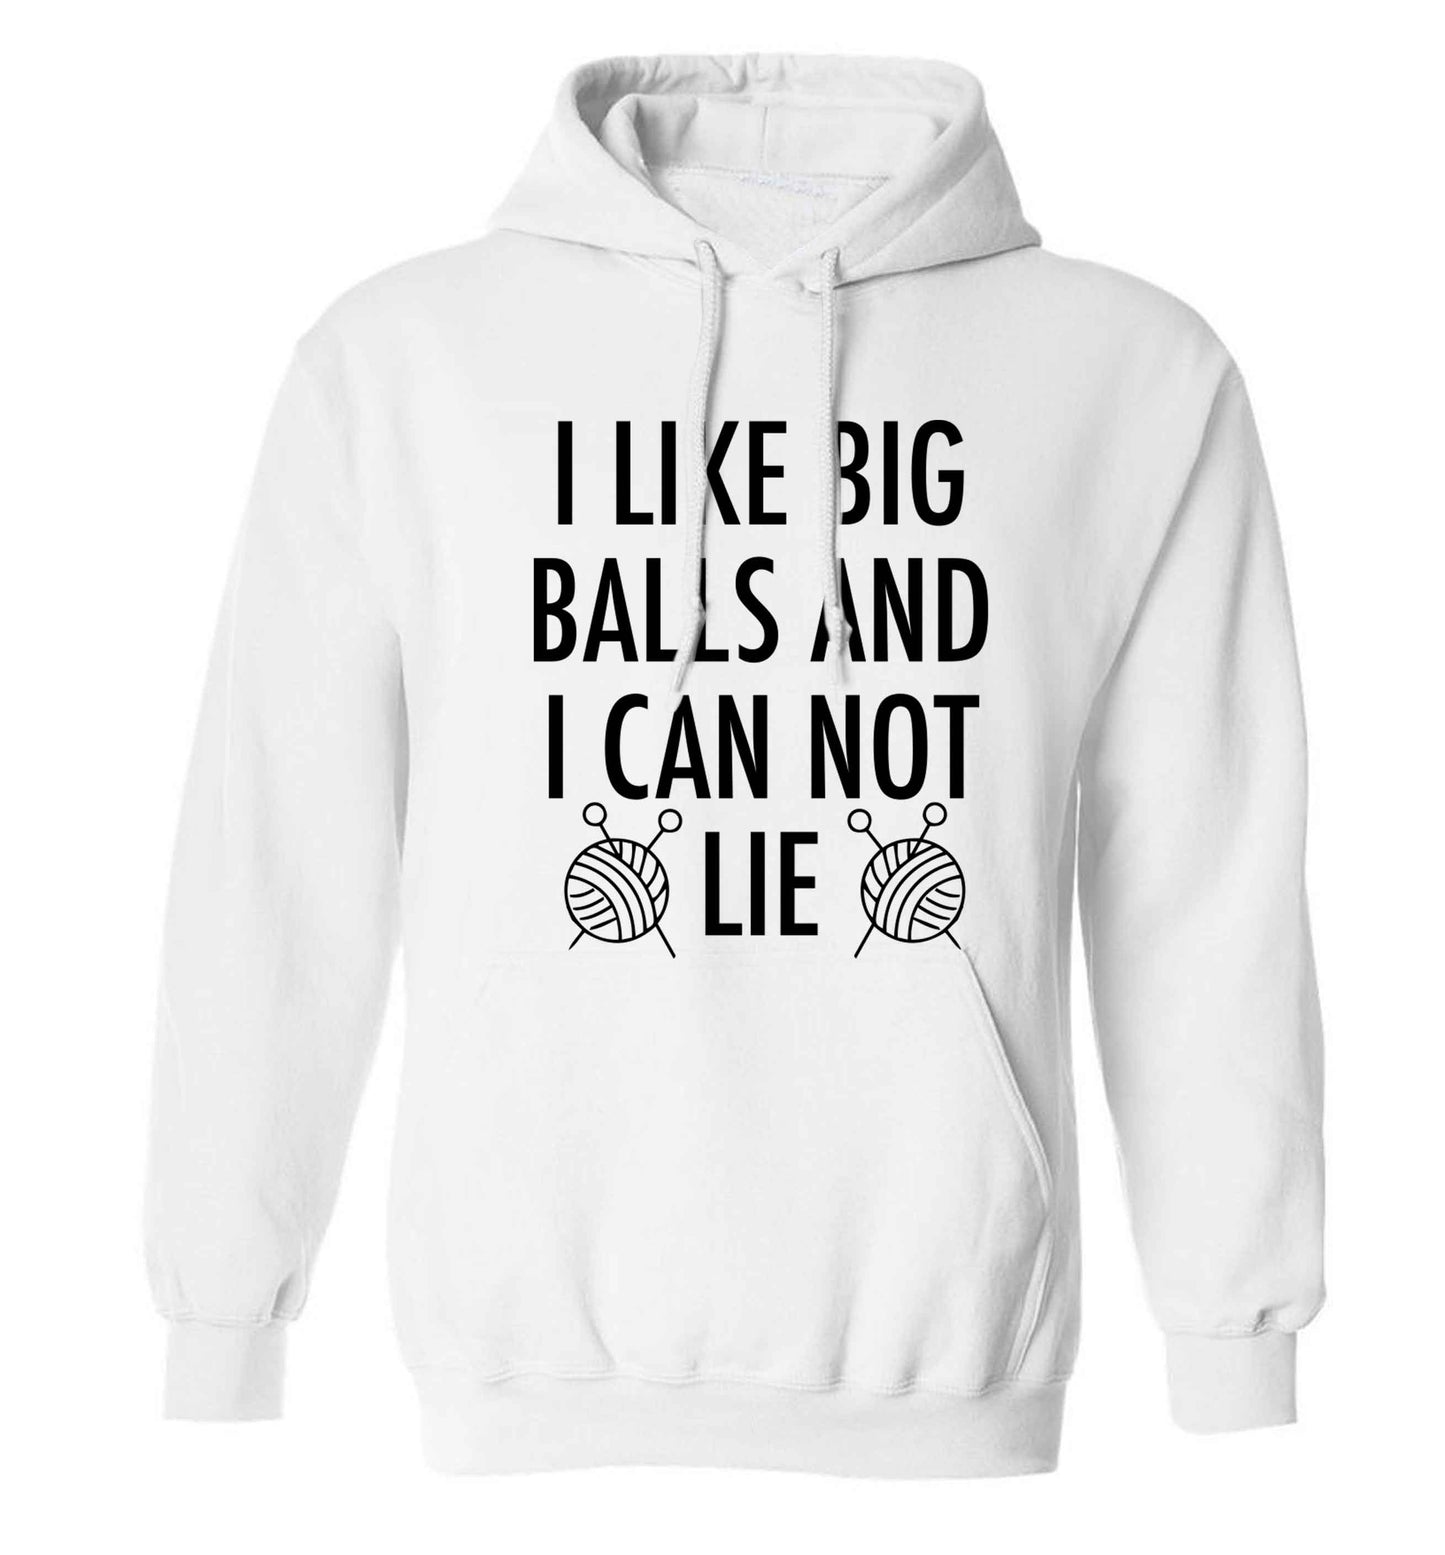 I like big balls and I can not lie adults unisex white hoodie 2XL